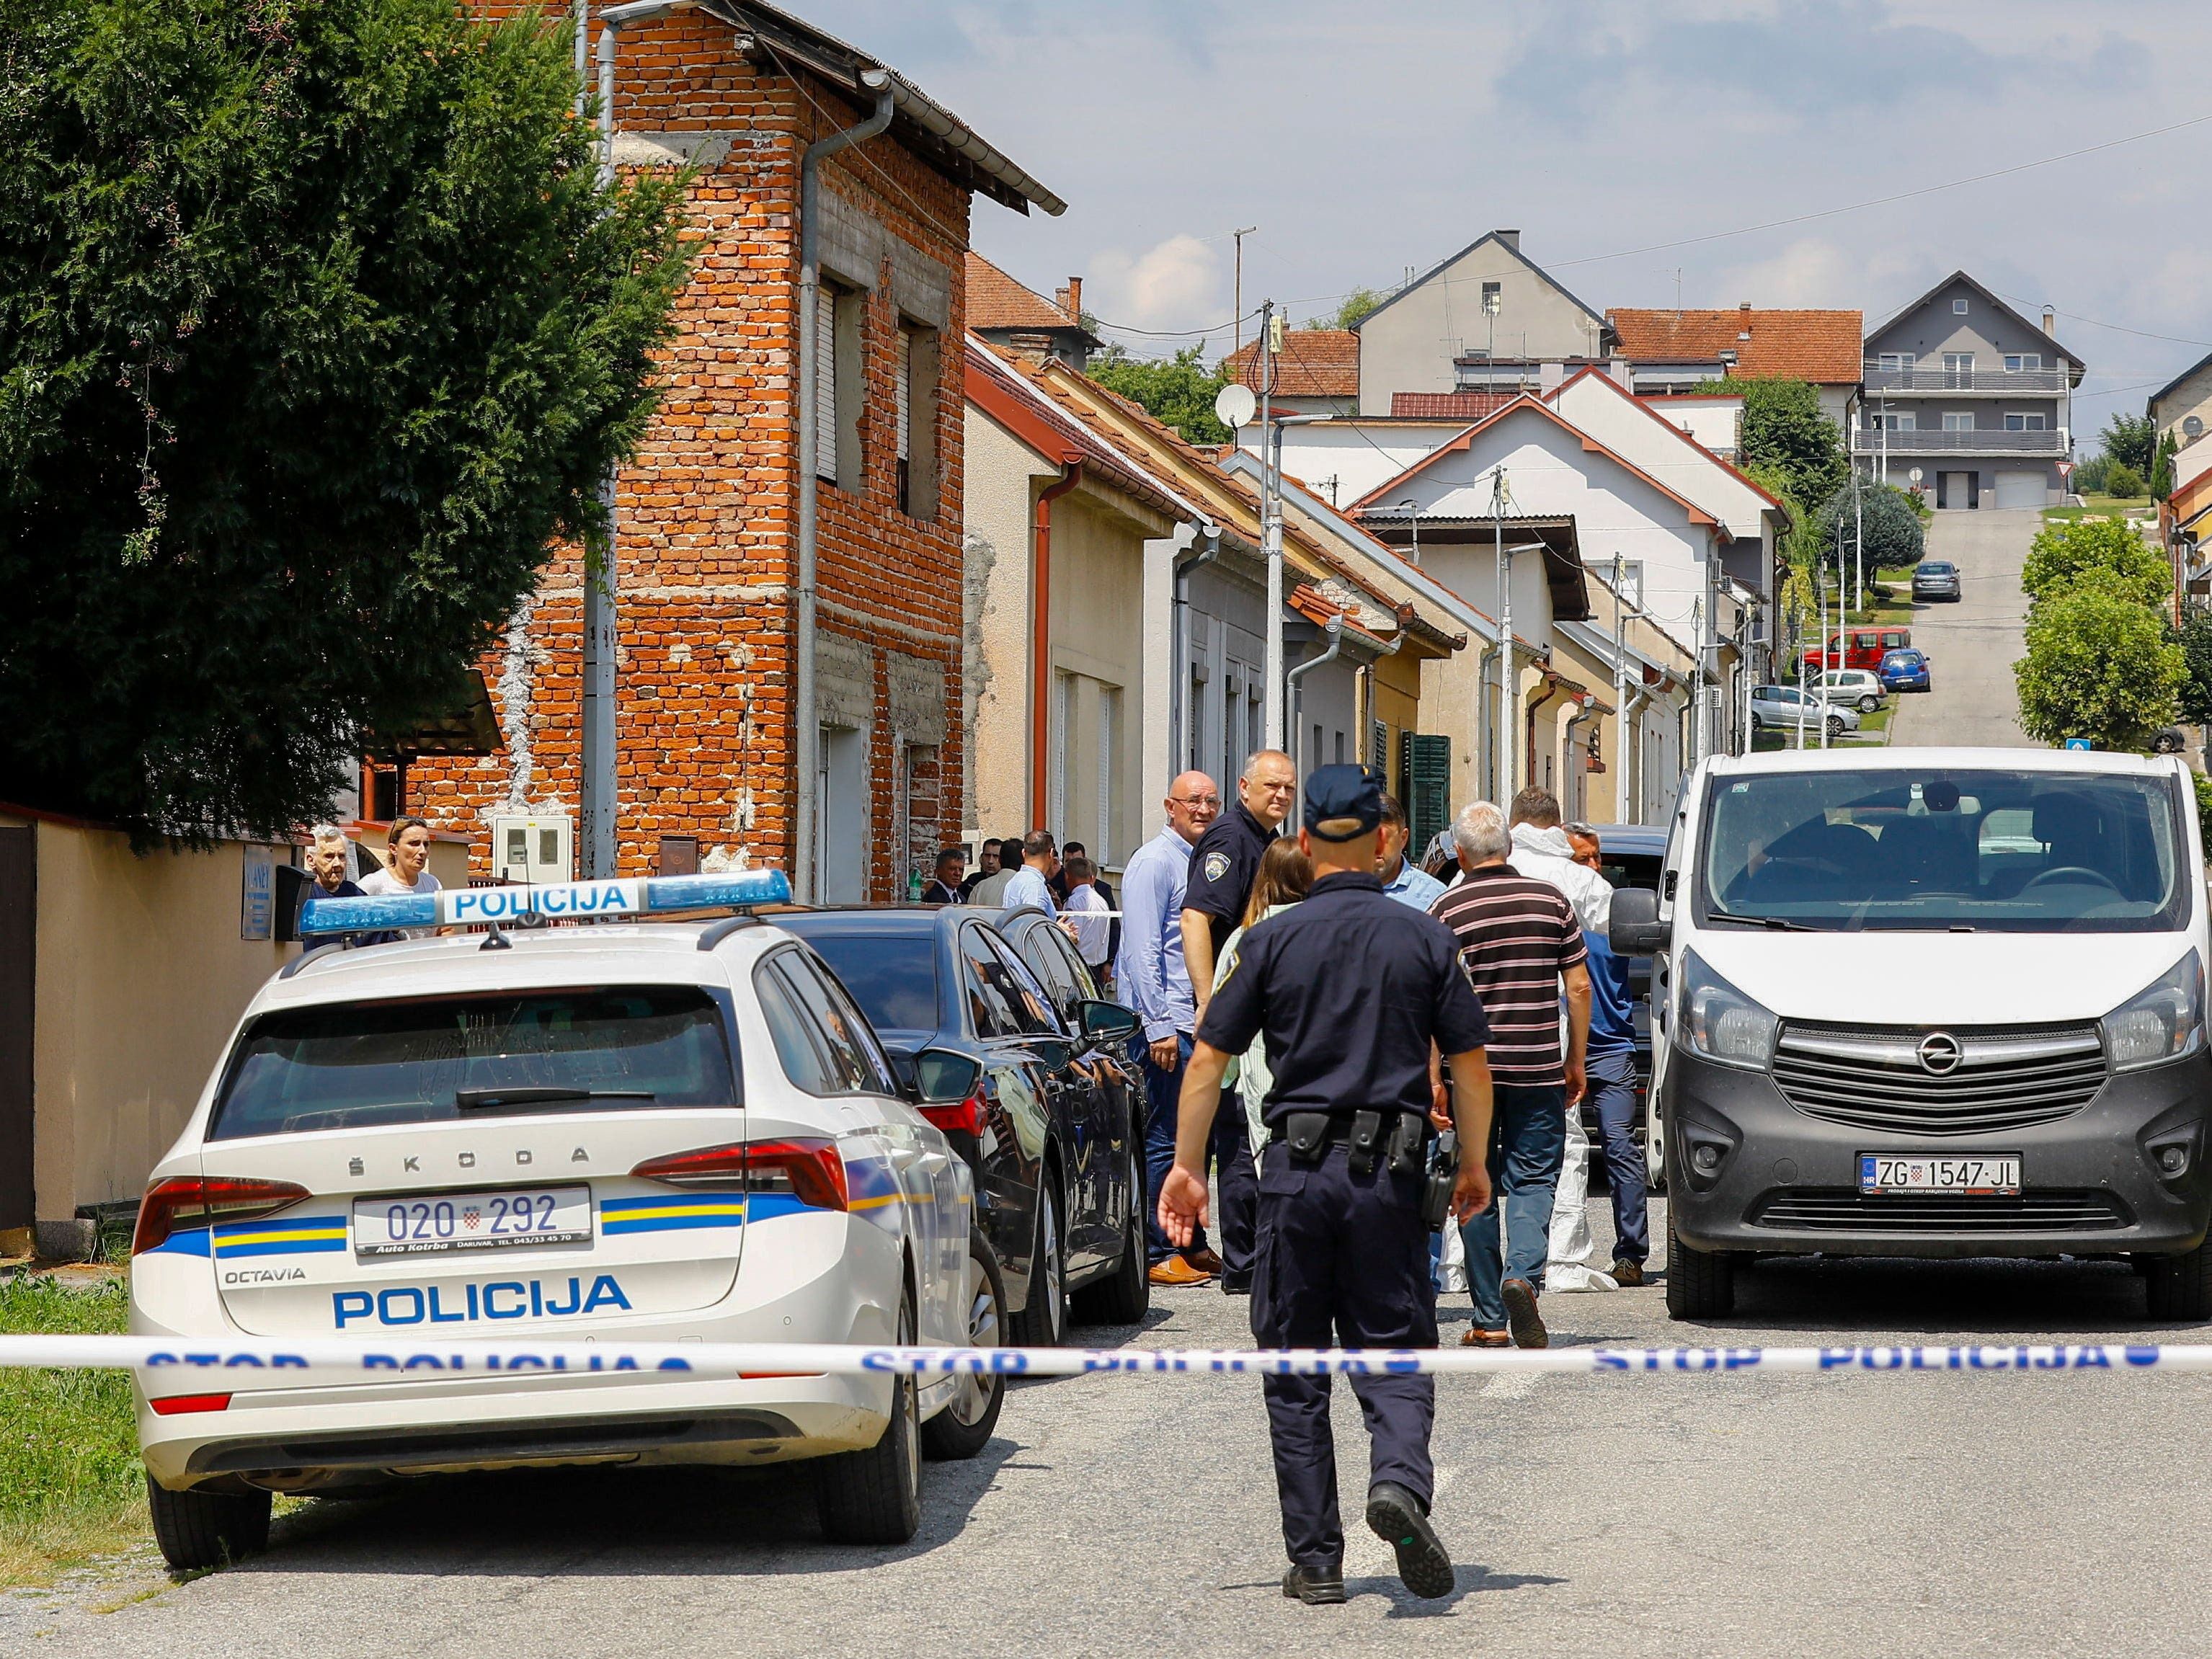 Man faces murder charges after mass shooting in Croatia nursing home